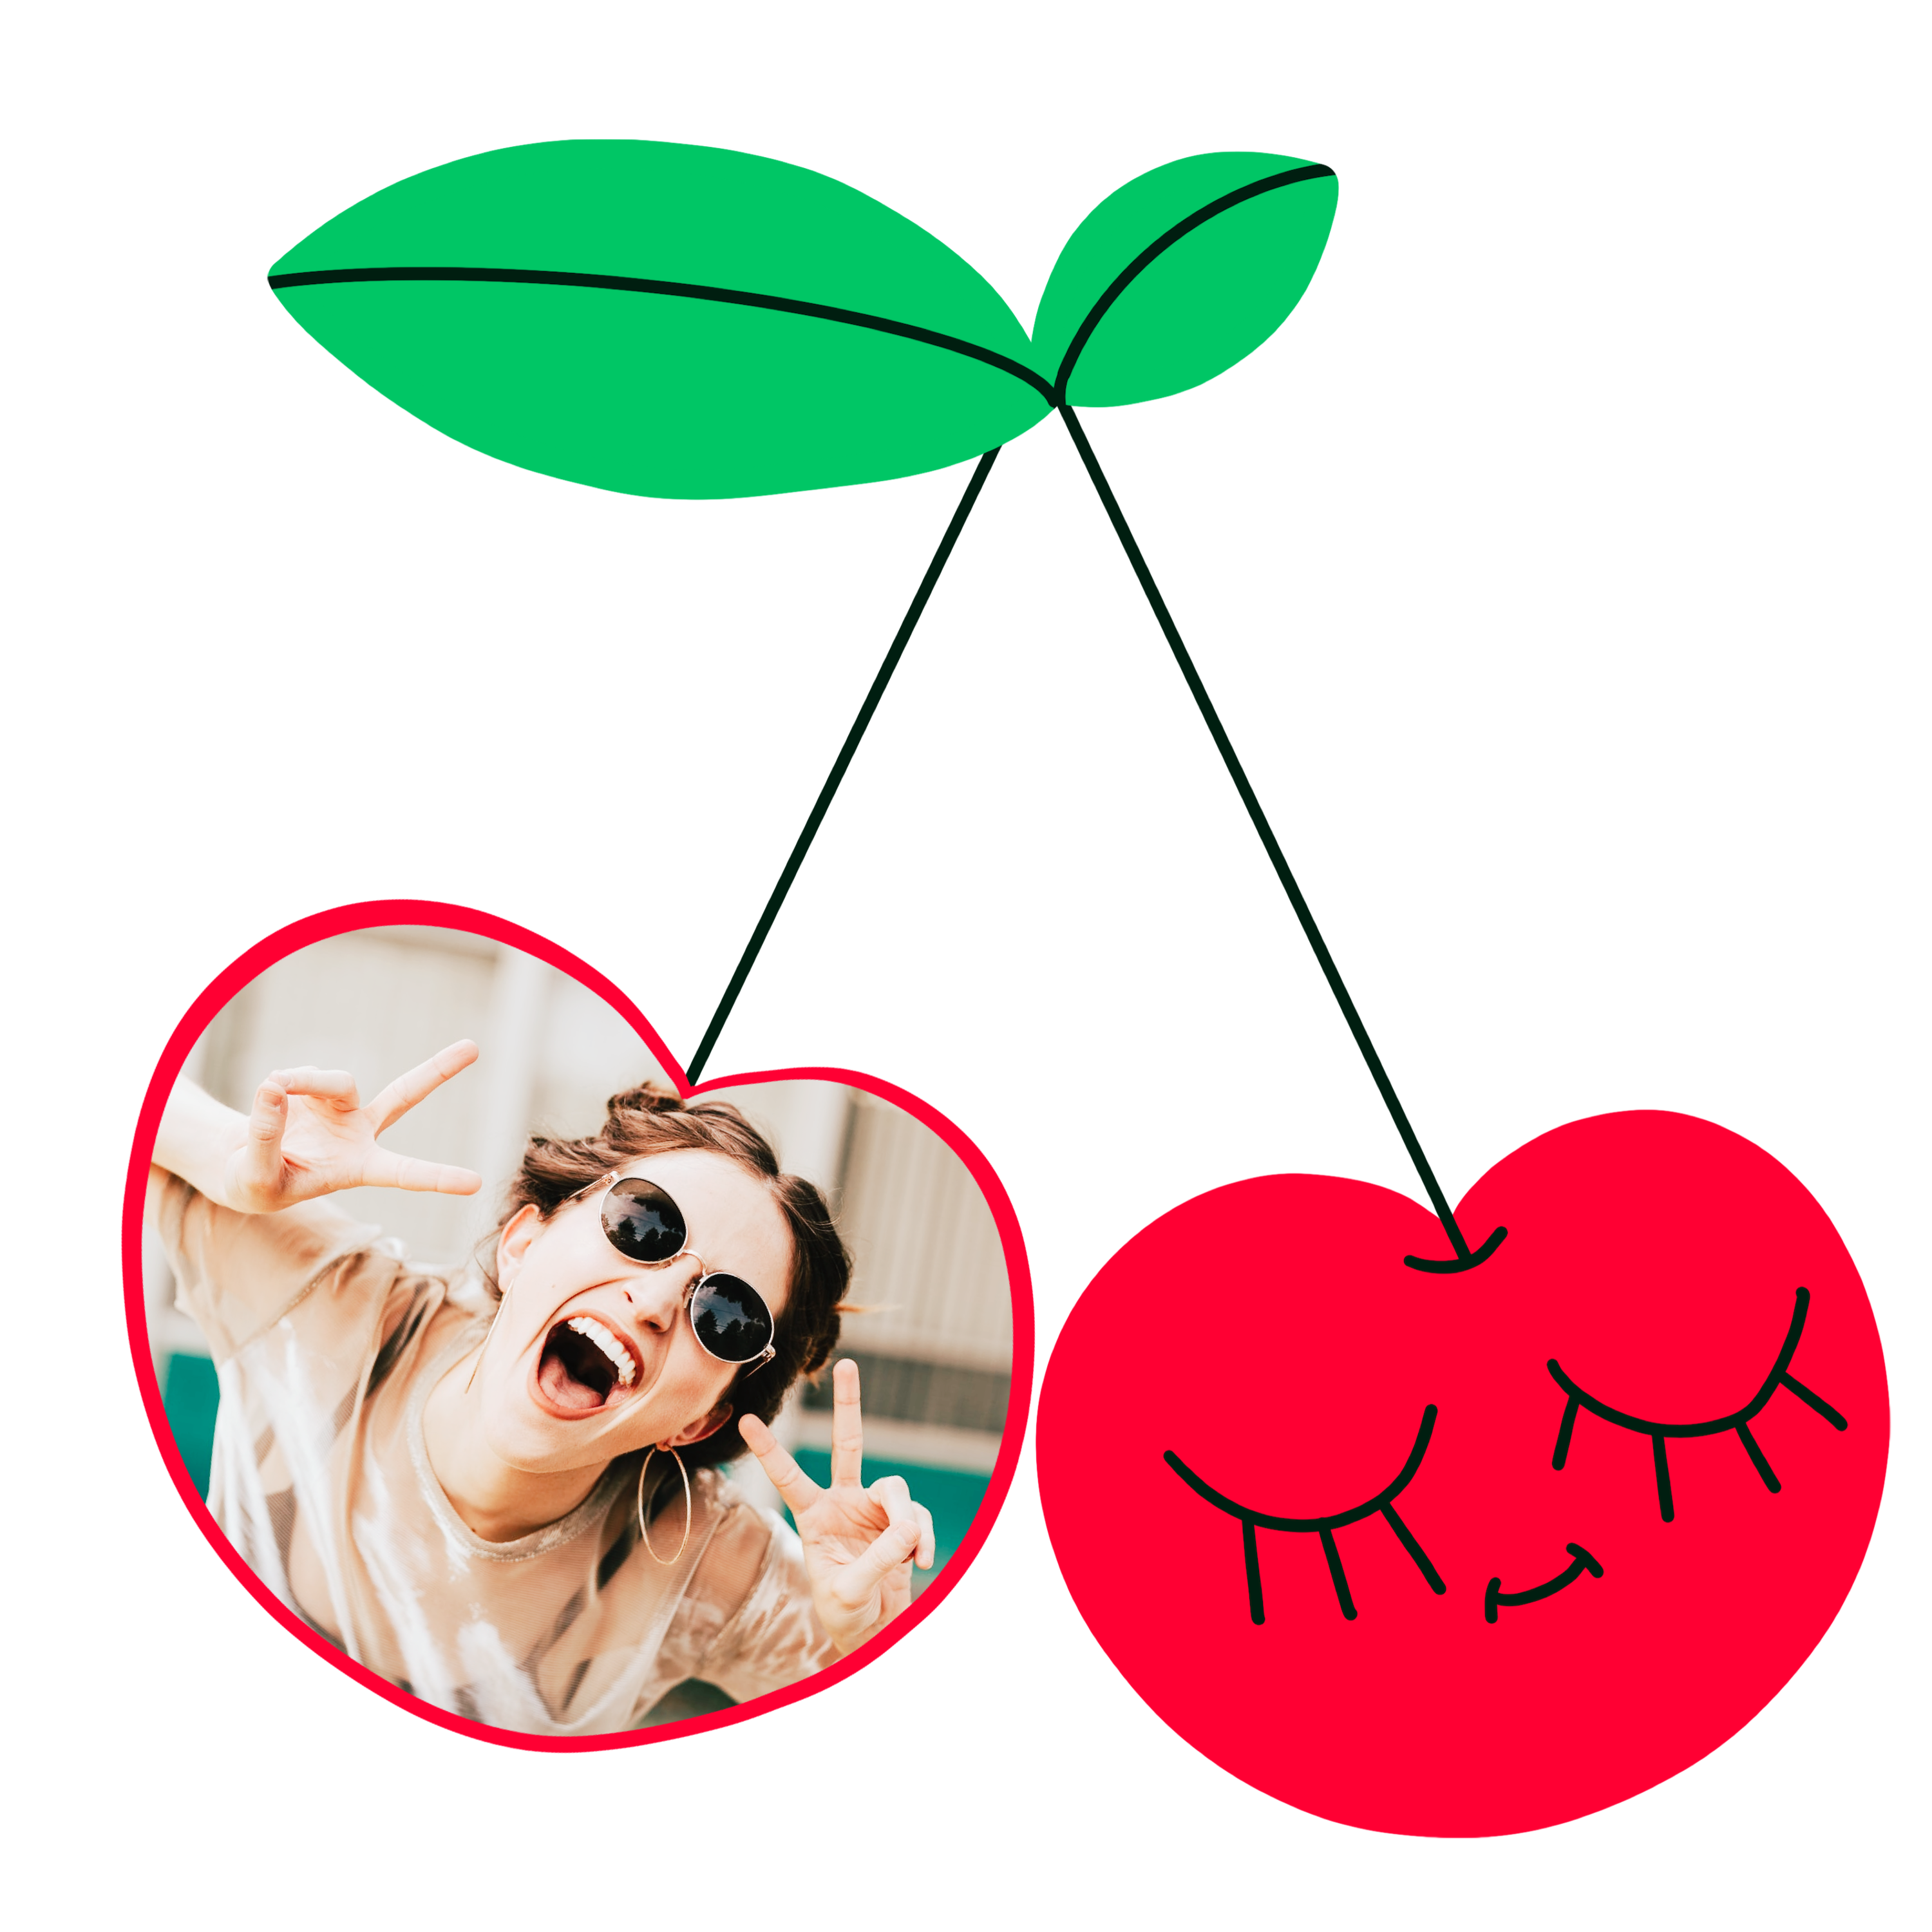 A Picture Of A Cherry With A Green Leaf Love Stickers Template